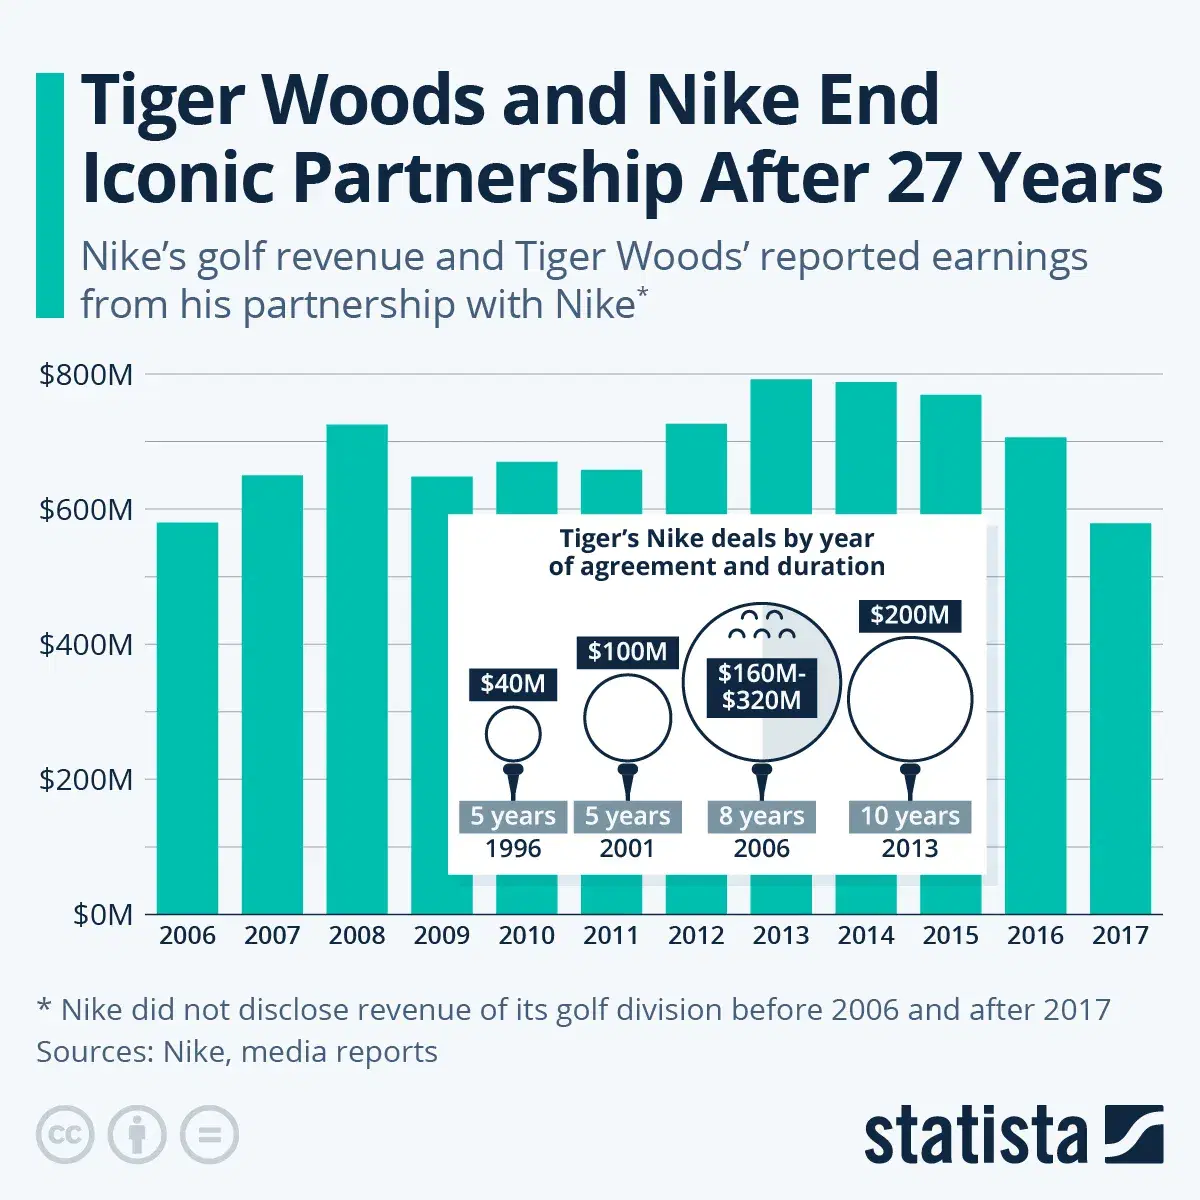 Tiger Woods and Nike End Iconic Partnership After 27 Years